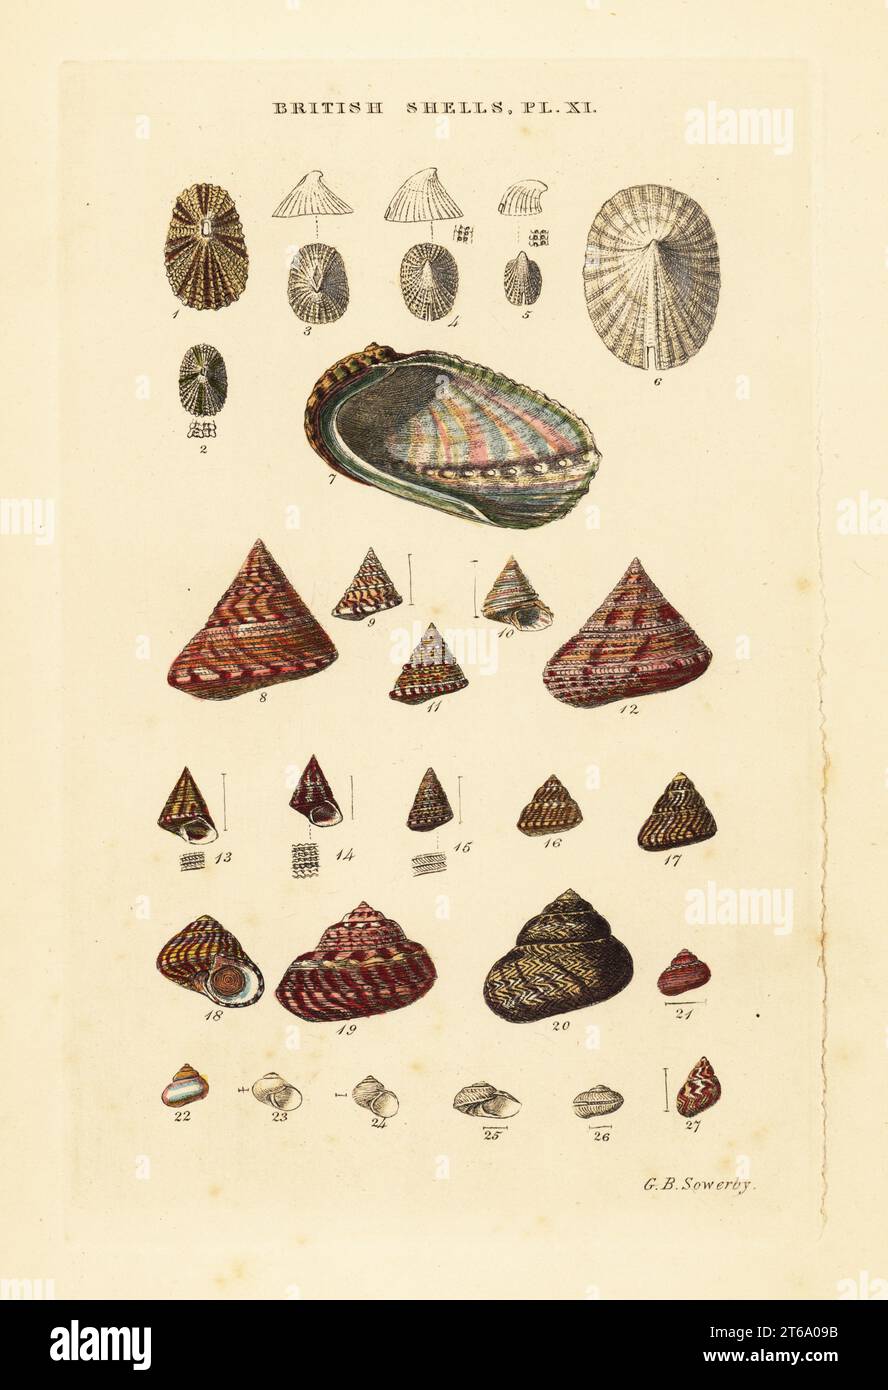 Ear shell, Haliotis vulgaris, sea snails, Trochus, Margarita, etc. Handcoloured copperplate engraving by George Brettingham Sowerby from his own Illustrated Index of British Shells, Sowerby and Simpkin, Marshall & Co., London, 1859. George Brettingham Sowerby II (1812-1884), British naturalist, illustrator, and conchologist. . Stock Photo